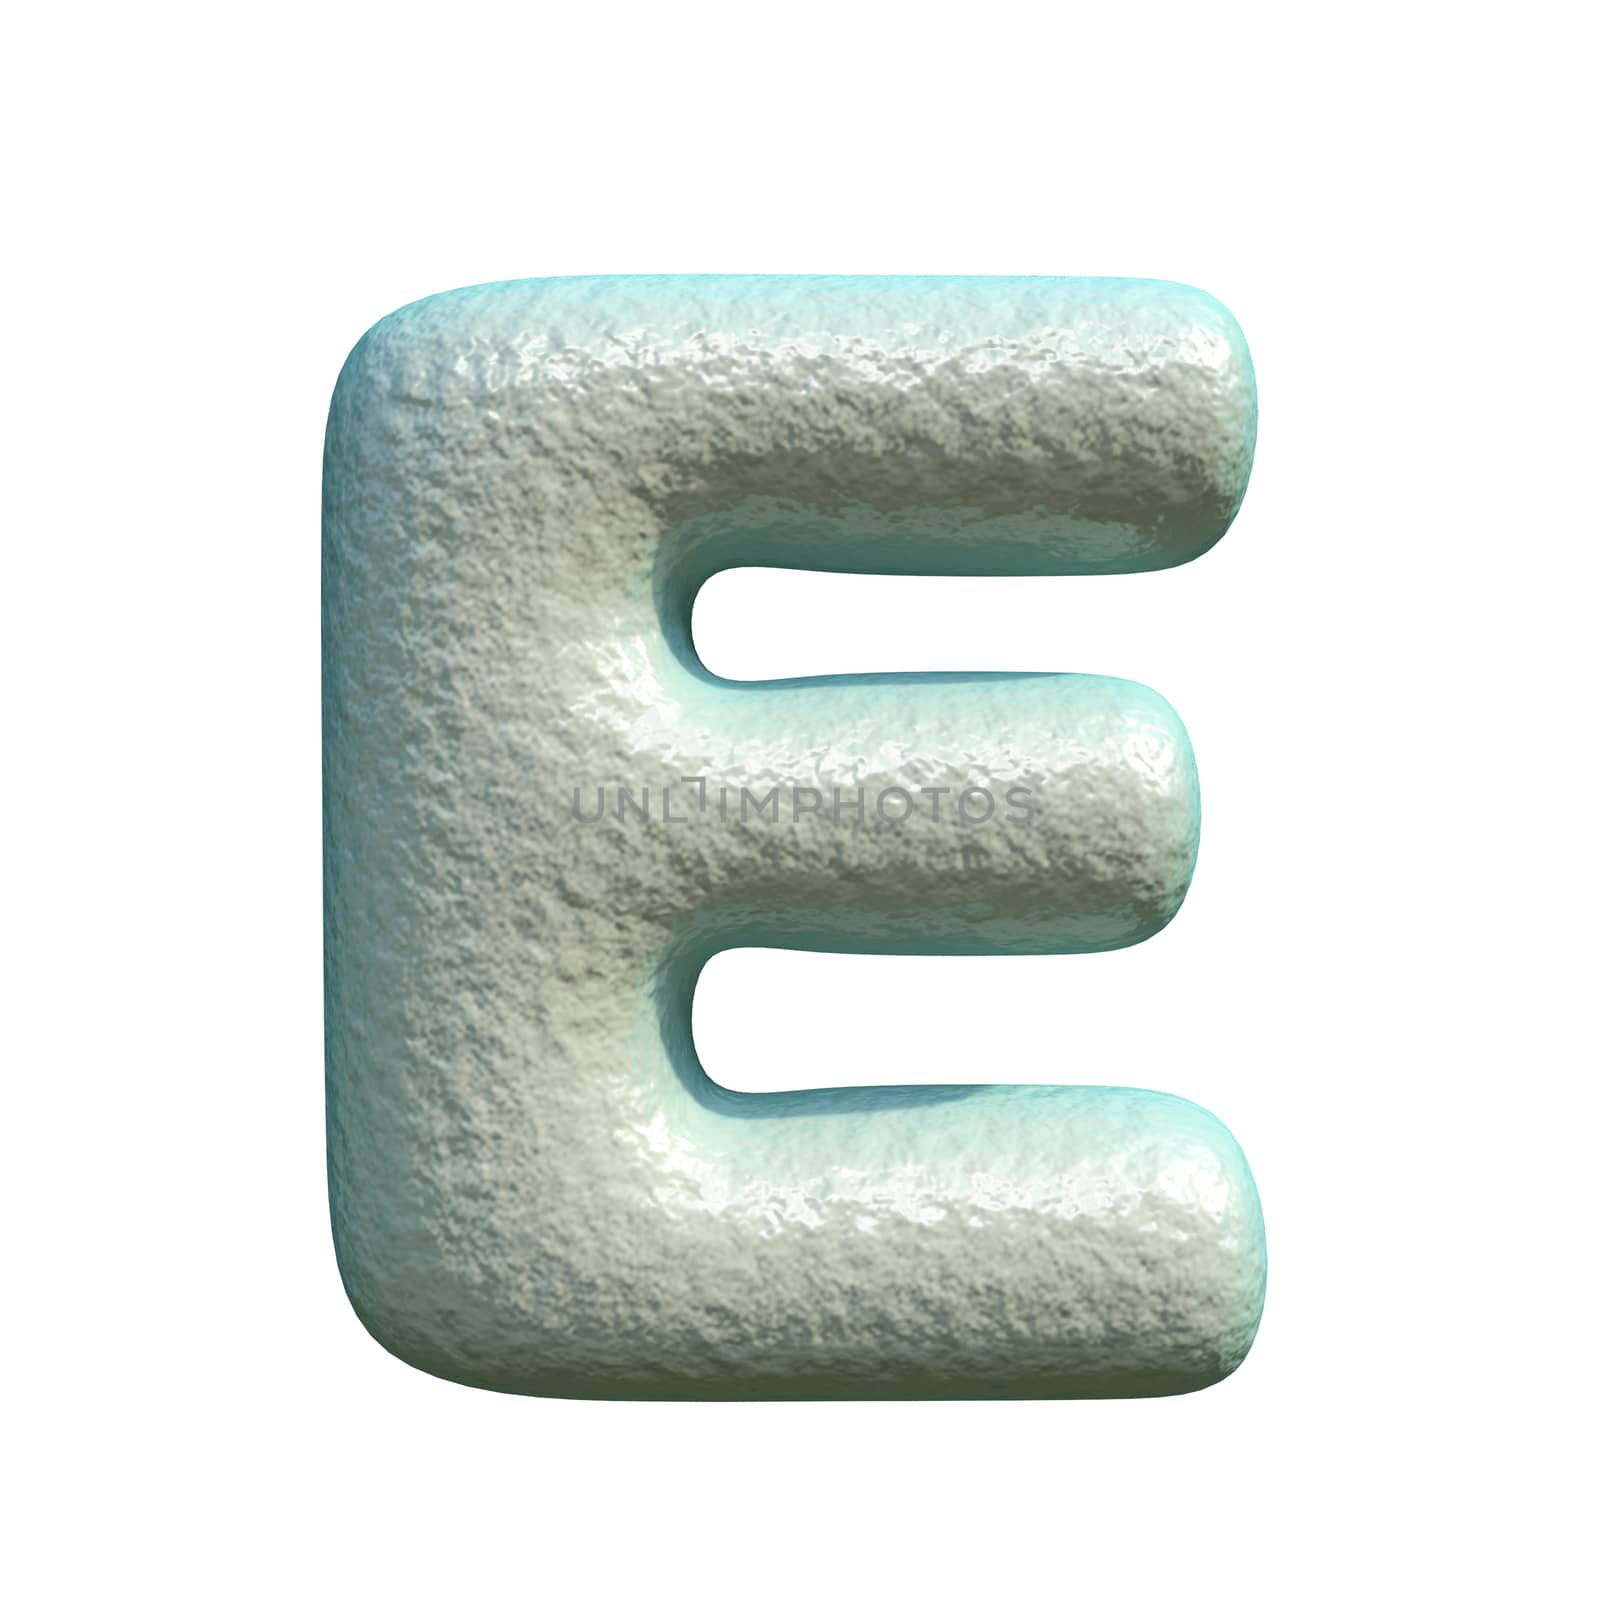 Grey blue clay font Letter E 3D rendering illustration isolated on white background